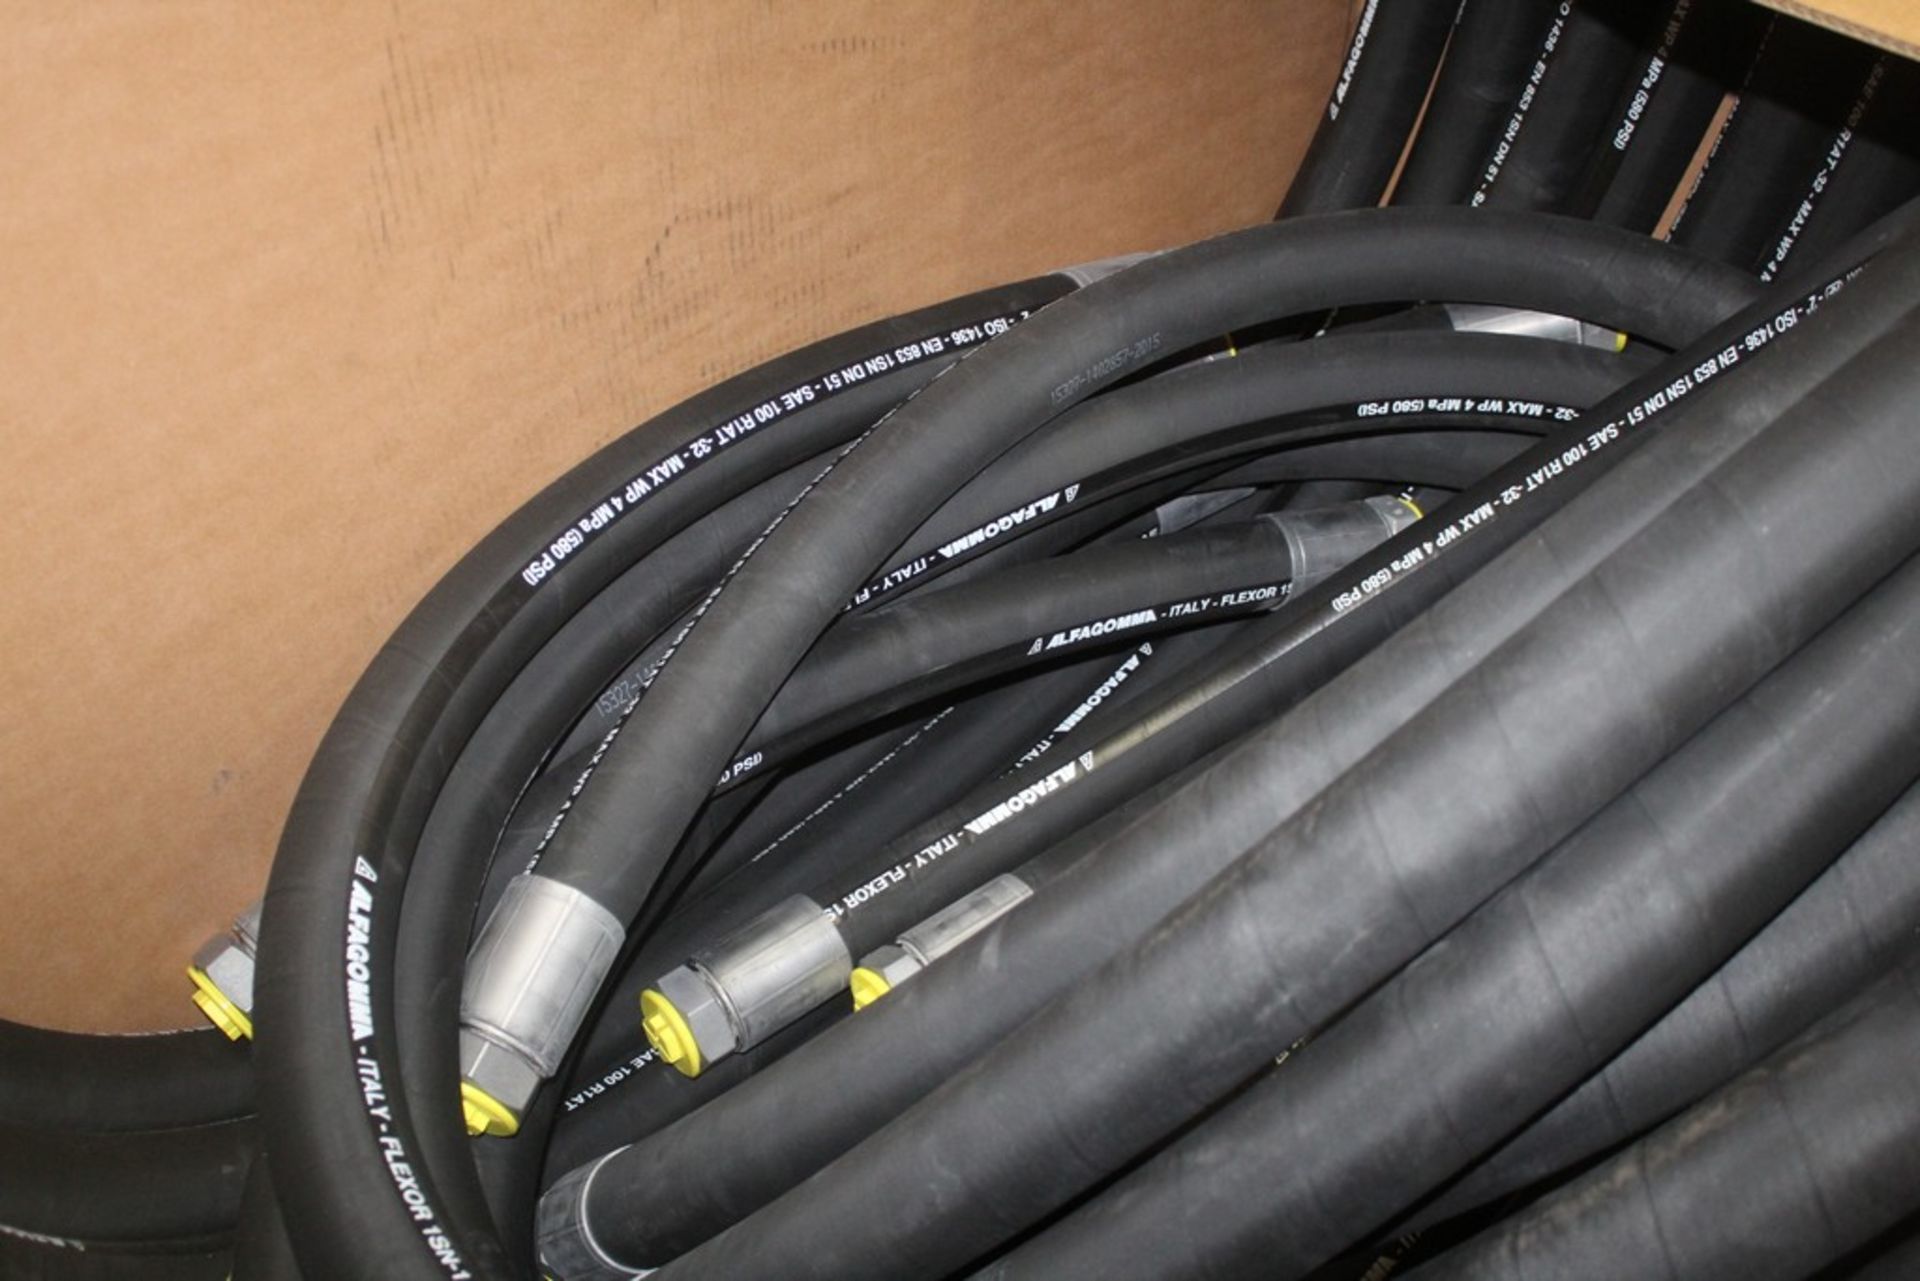 FLEXION HYDRAULIC HOSE, 2" IN CRATE - Image 2 of 3